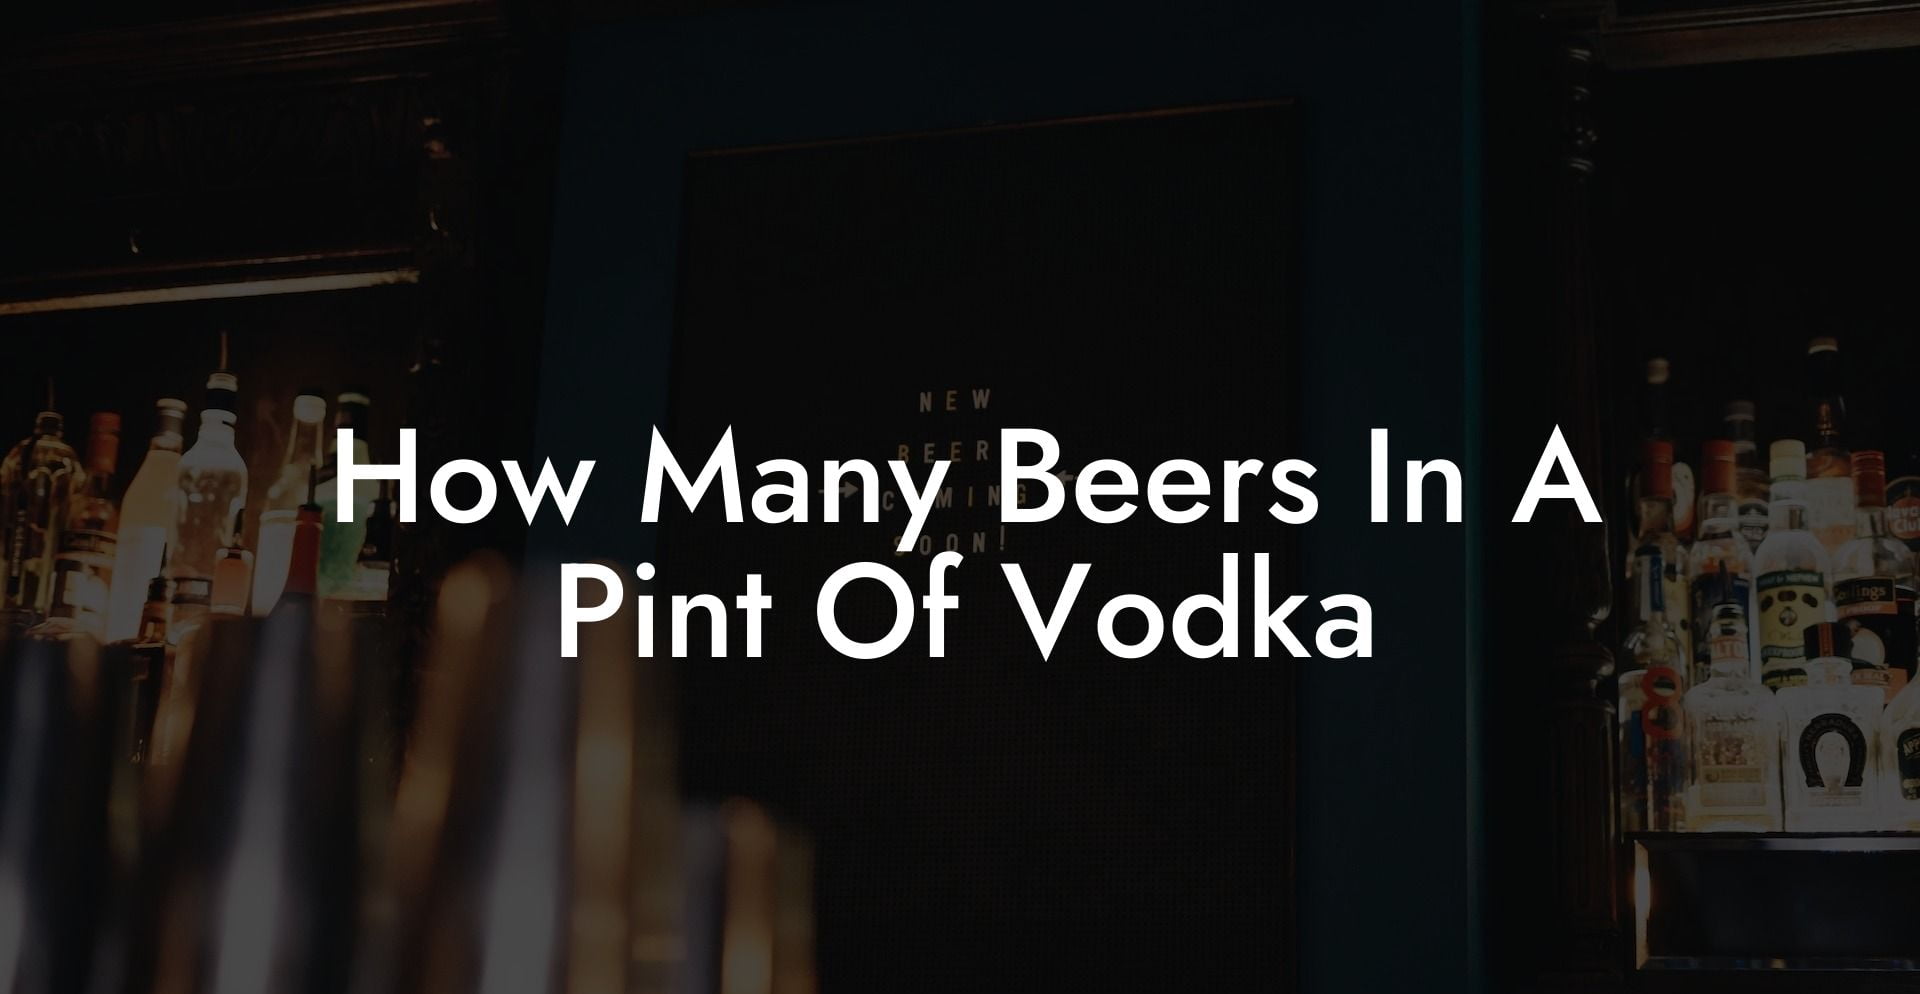 How Many Beers In A Pint Of Vodka